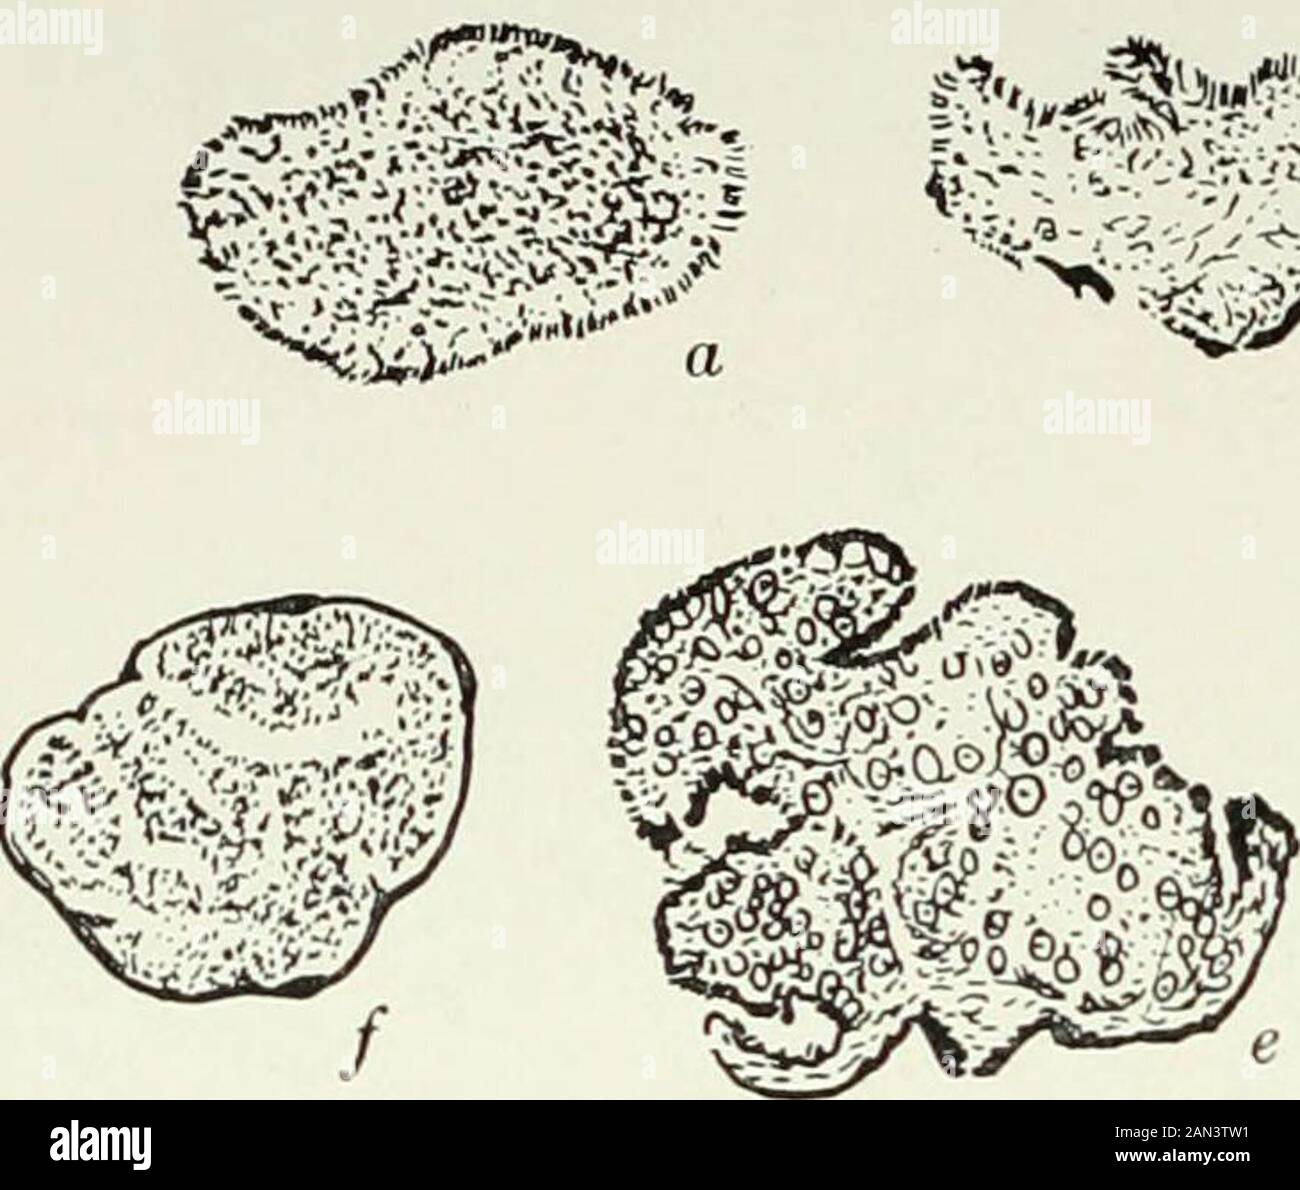 Fungi, Ascomycetes, Ustilaginales, Uredinales . gina-tions of the upper surface, and internally the loose tissue of the sterile veins1 01 nes recognizable. Owing to the rapid growth of the upper portion of the young fruit, thebasal sheath is bent backwards, while at various points along the fertile veinsthe first signs of asci appear. Later the peripheral tissues become thickened,together with the remains of the basal sheath, and form the peridium. Thisultimately closes over the points where the fertile veins are in communicationwith the exterior. Thus the young fruit is open at first, the hym Stock Photo